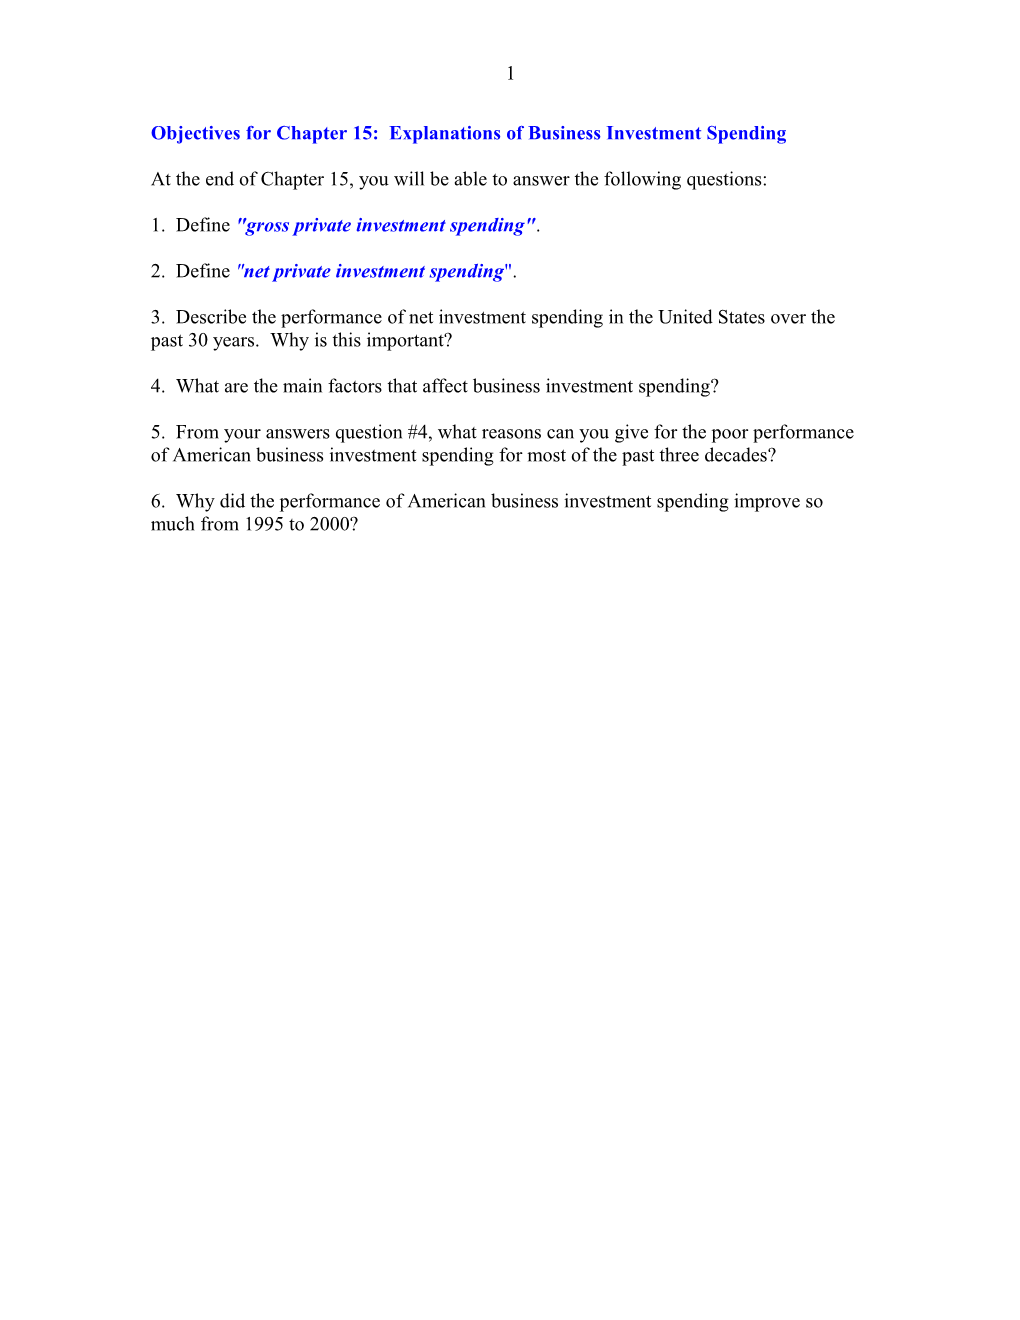 Objectives for Chapter 15: Explanations of Business Investment Spending